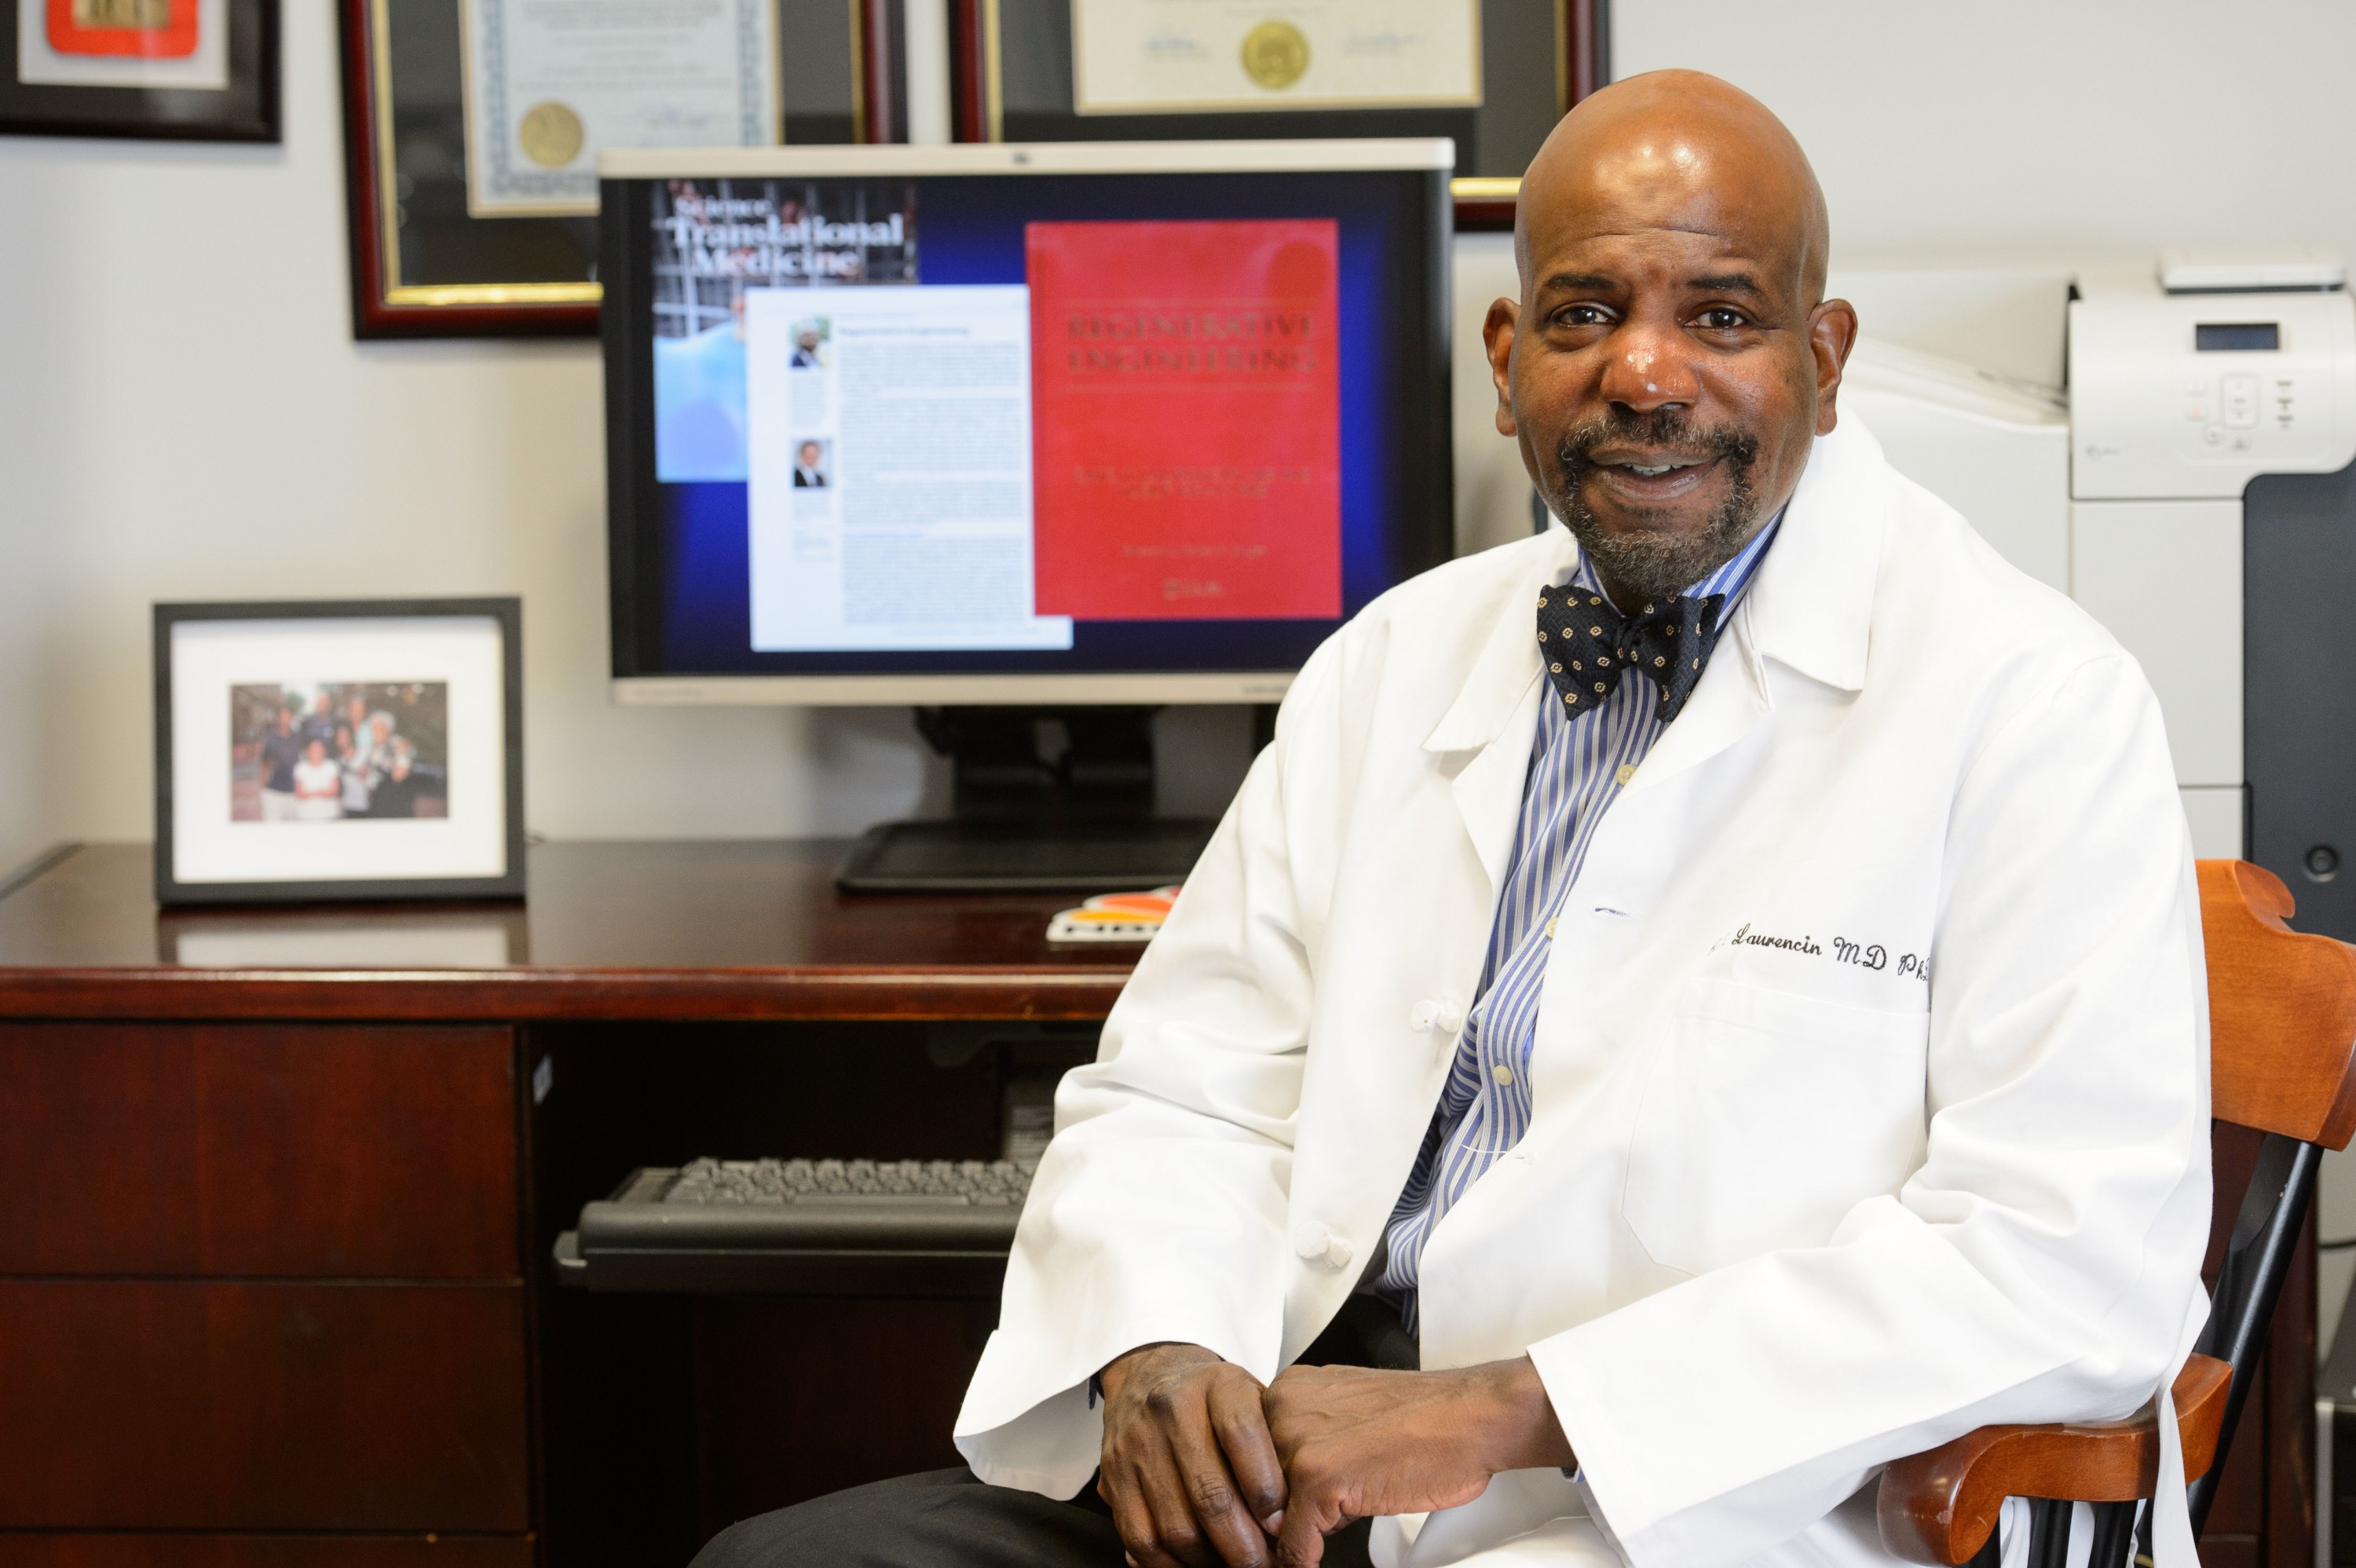 Dr. Cato Laurencin at his office at UConn Health in Farmington on Oct. 6, 2014. (Peter Morenus/UConn Photo)